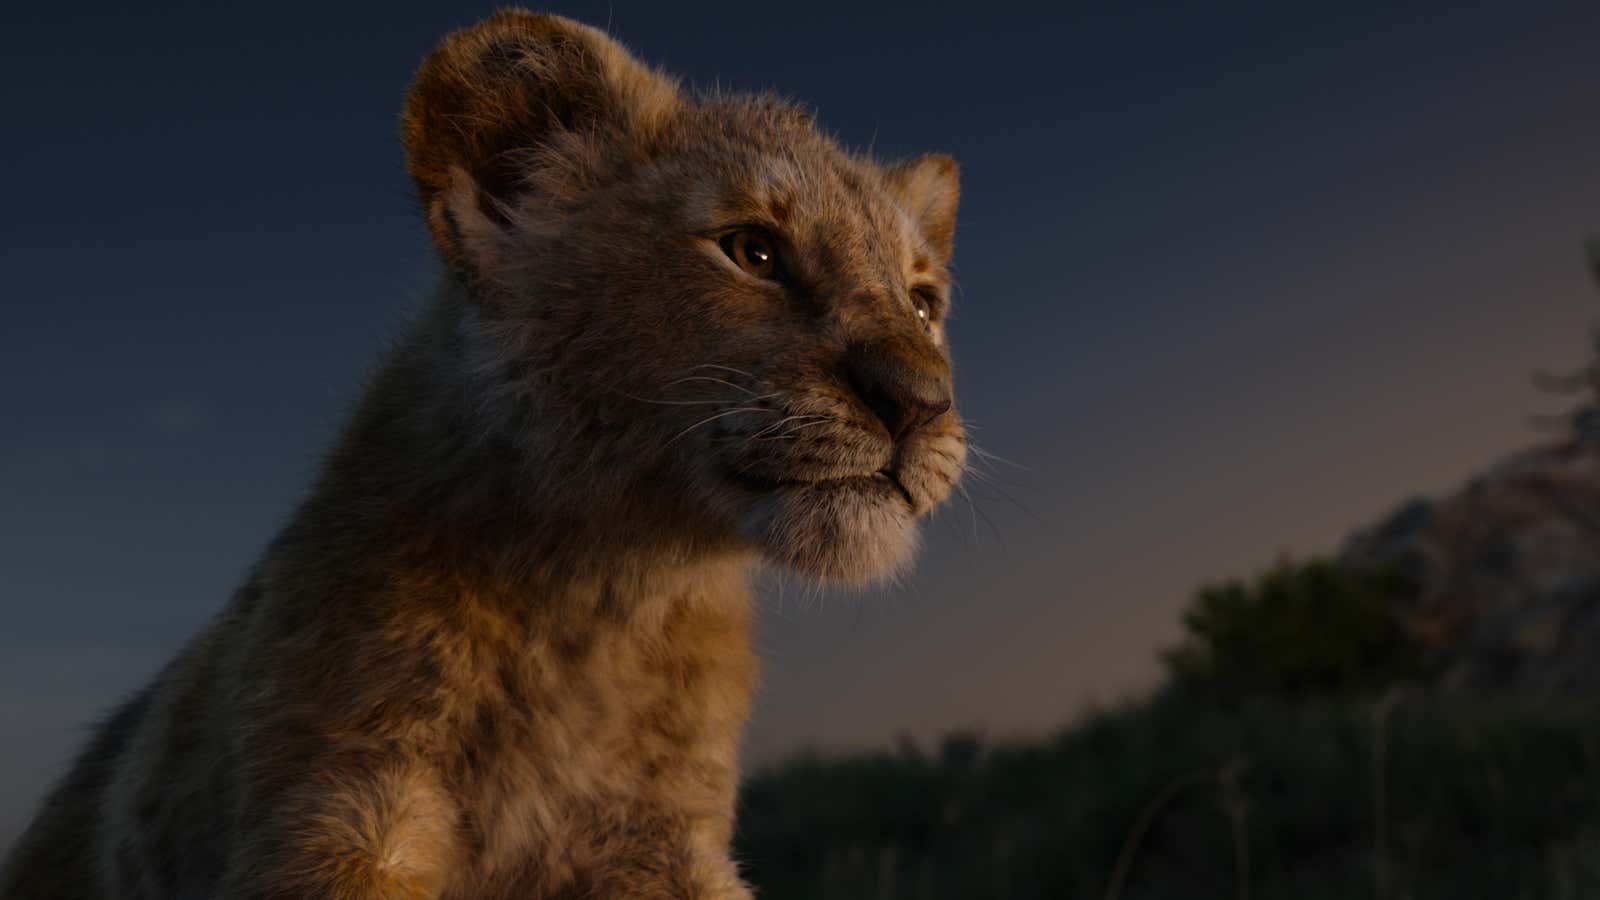 Be prepared for the photorealistic cruddiness of Disney’s pointless <i>Lion King</i> remake